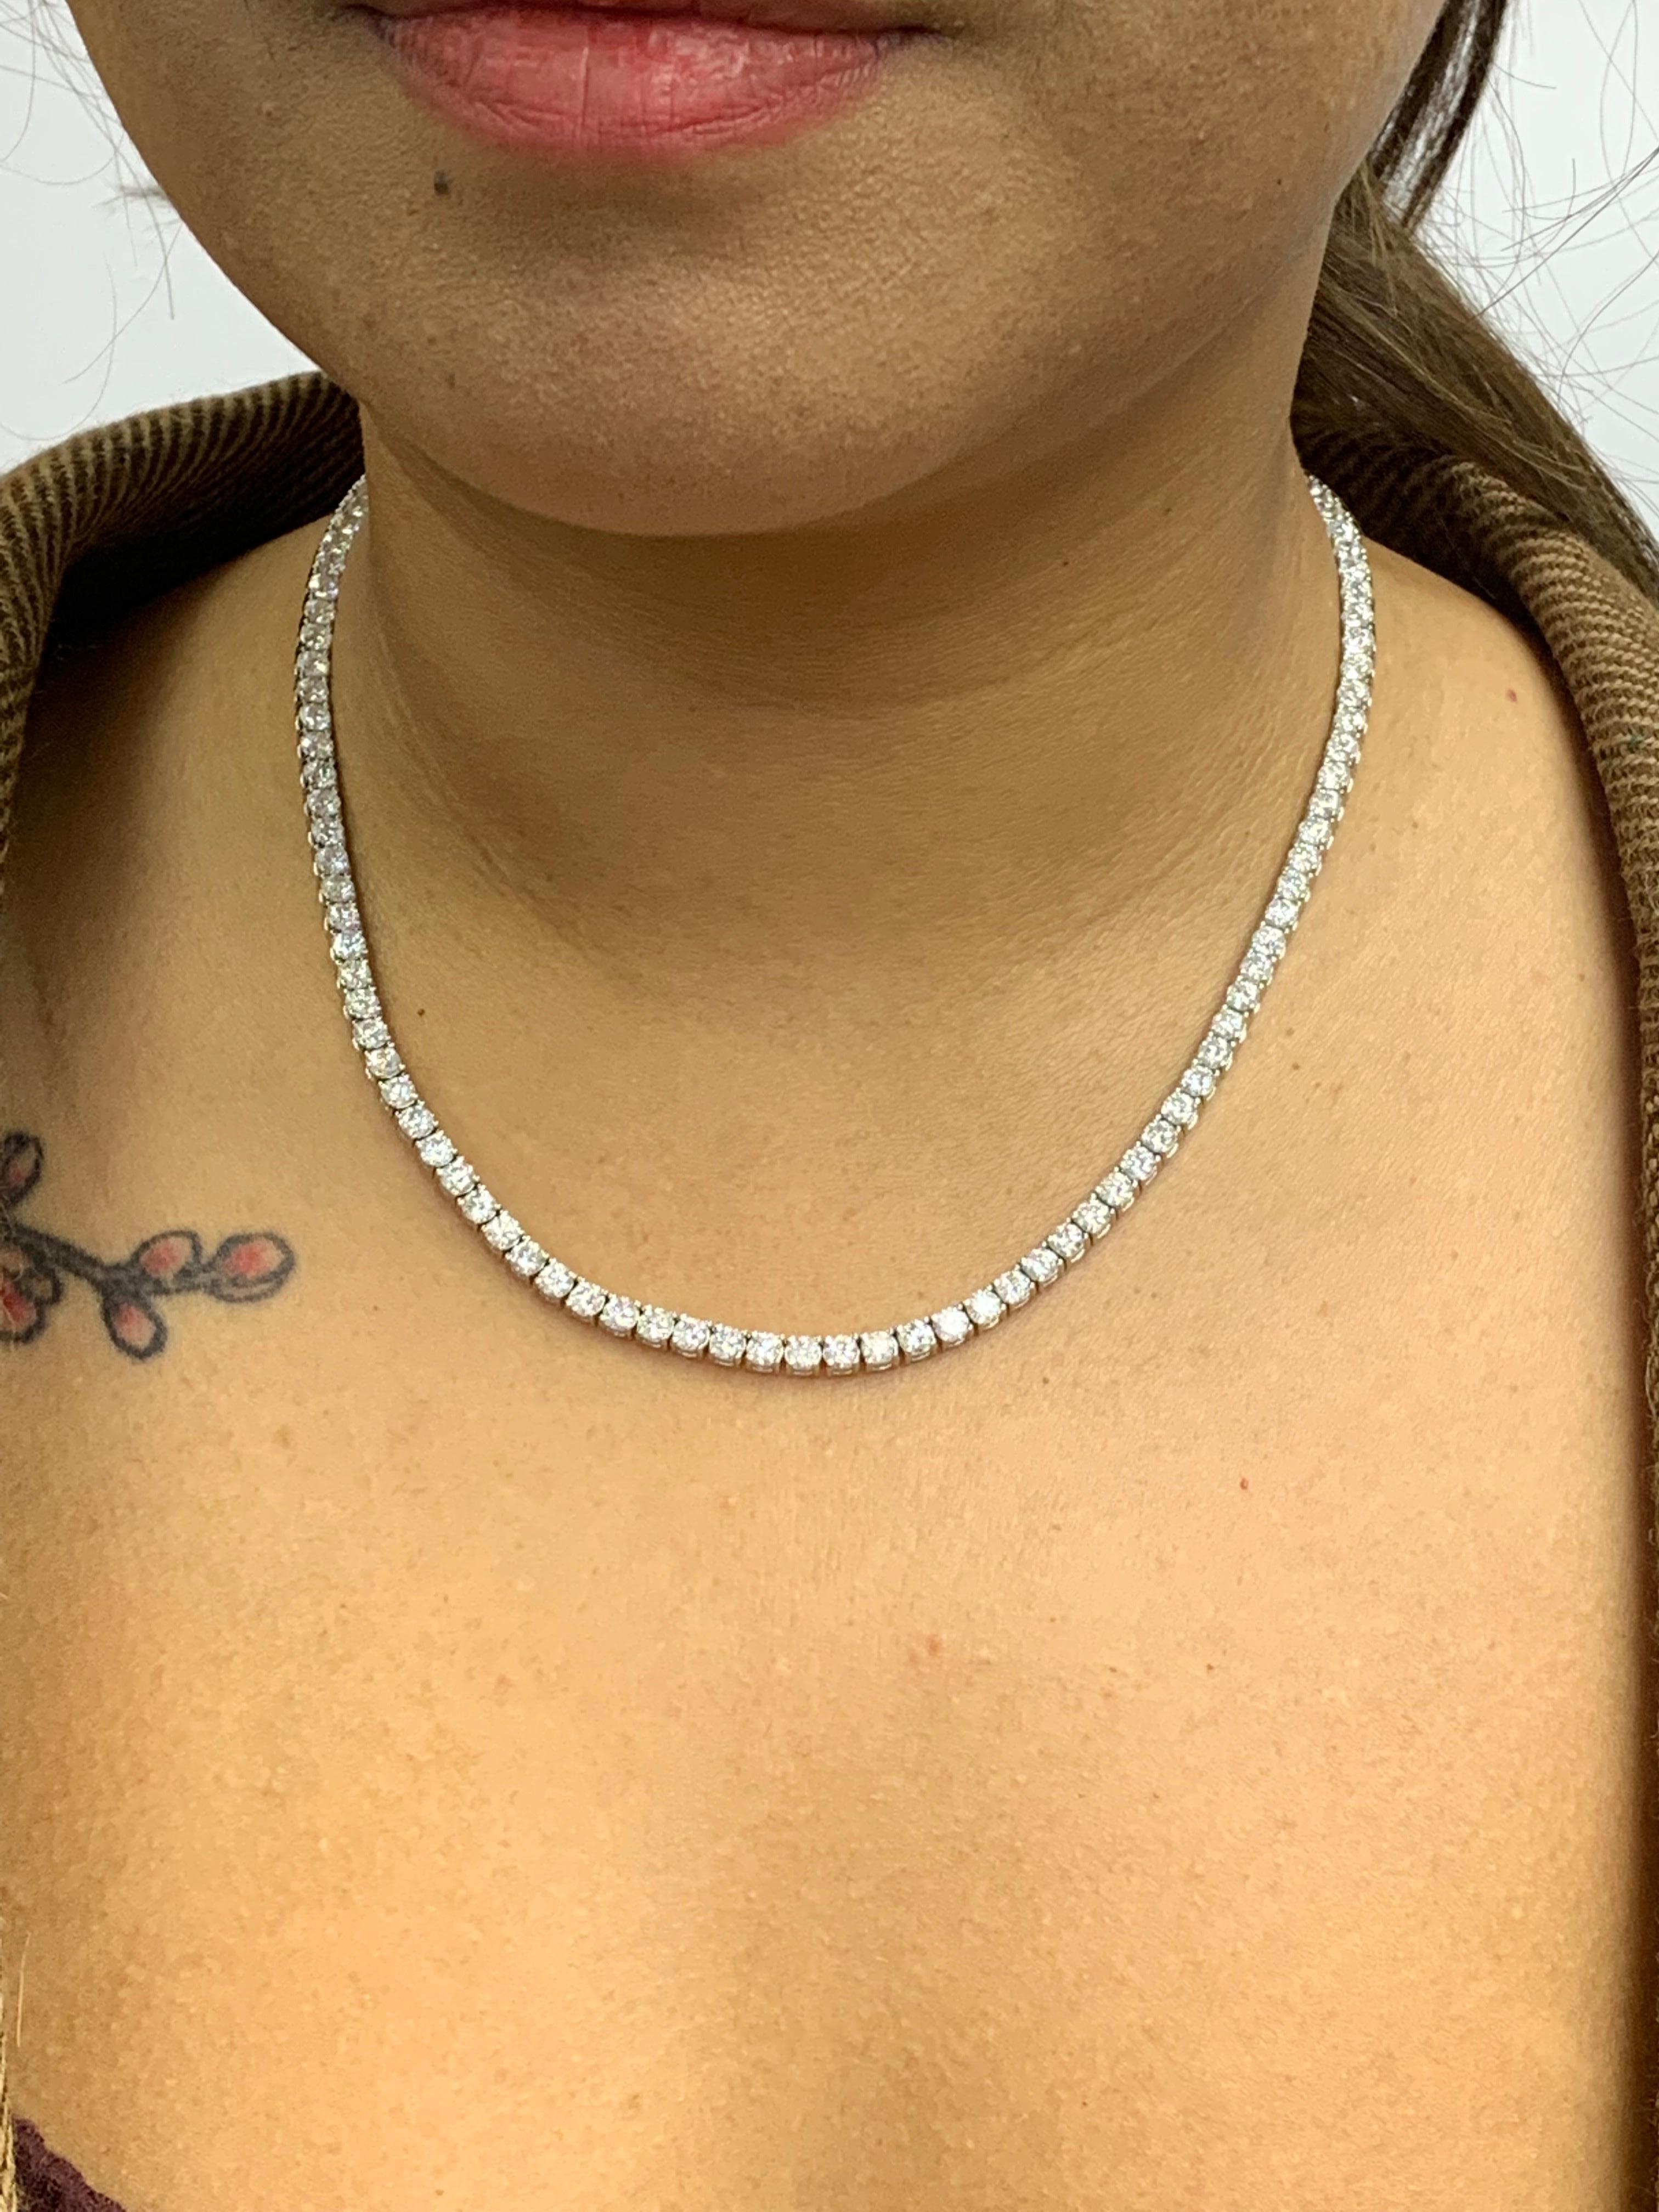 18 Carat Diamond Tennis Necklace in 14K White Gold For Sale 3